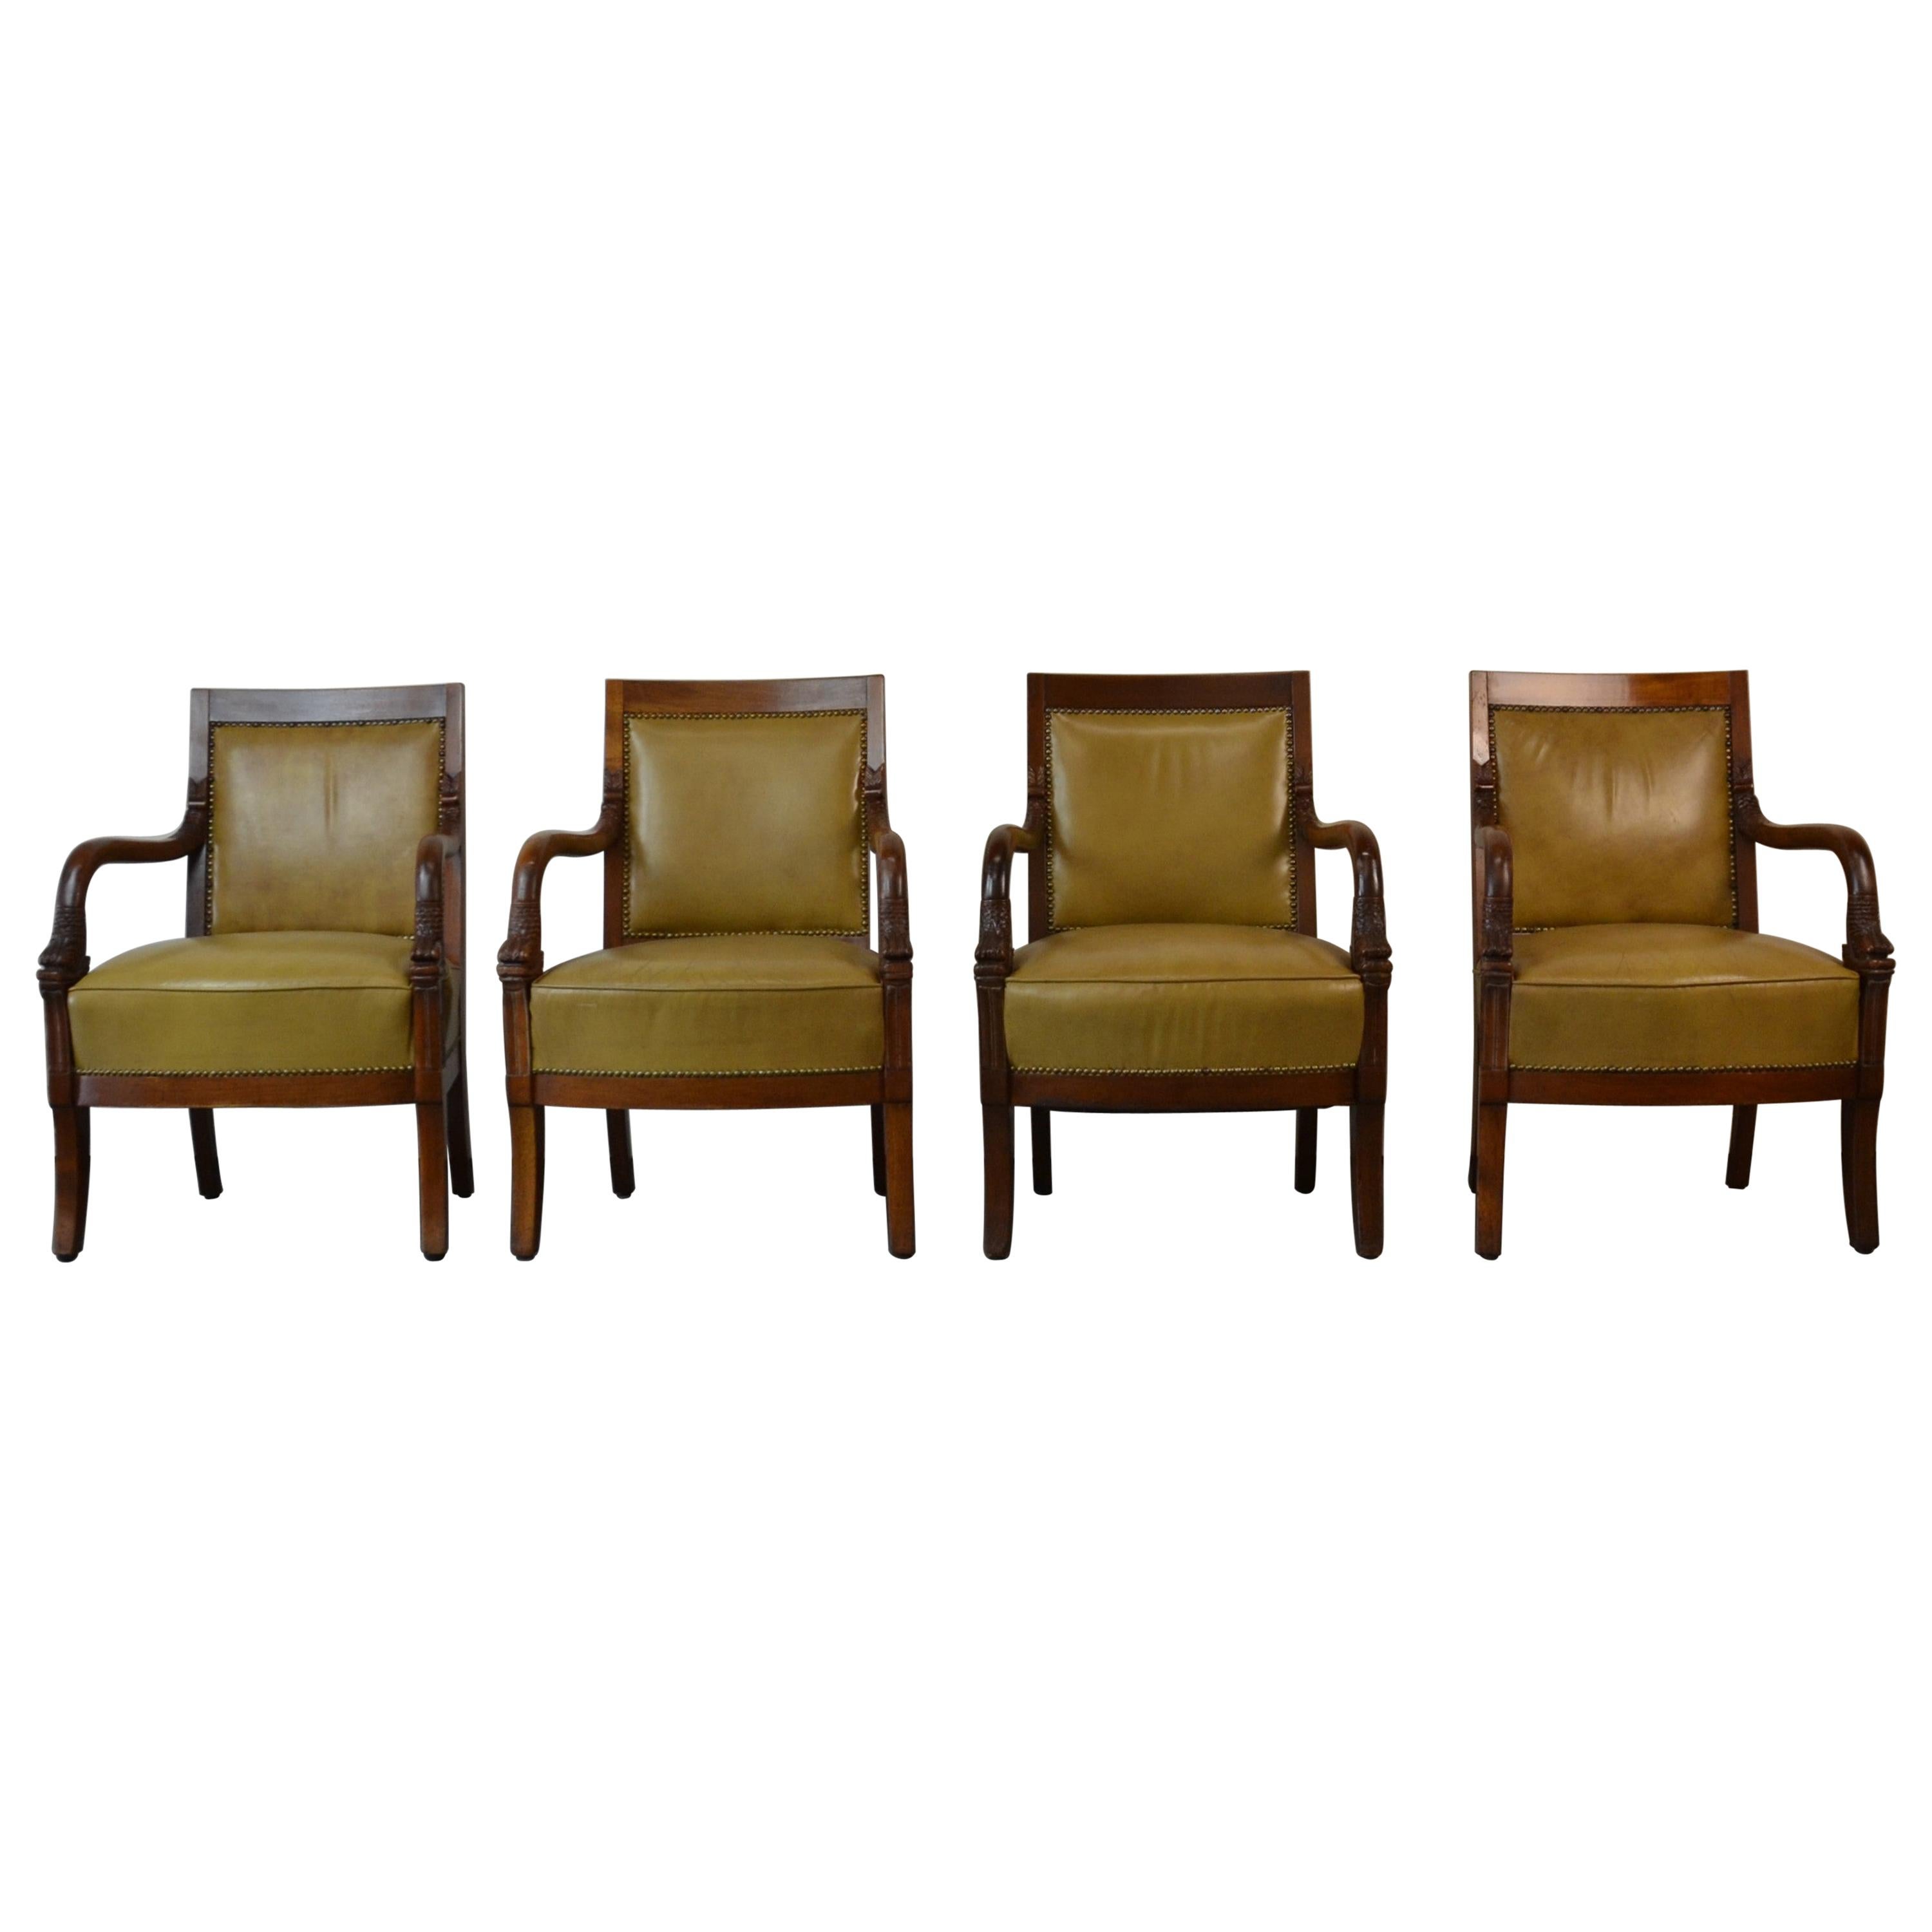 Leather Empire Style Chairs S/4